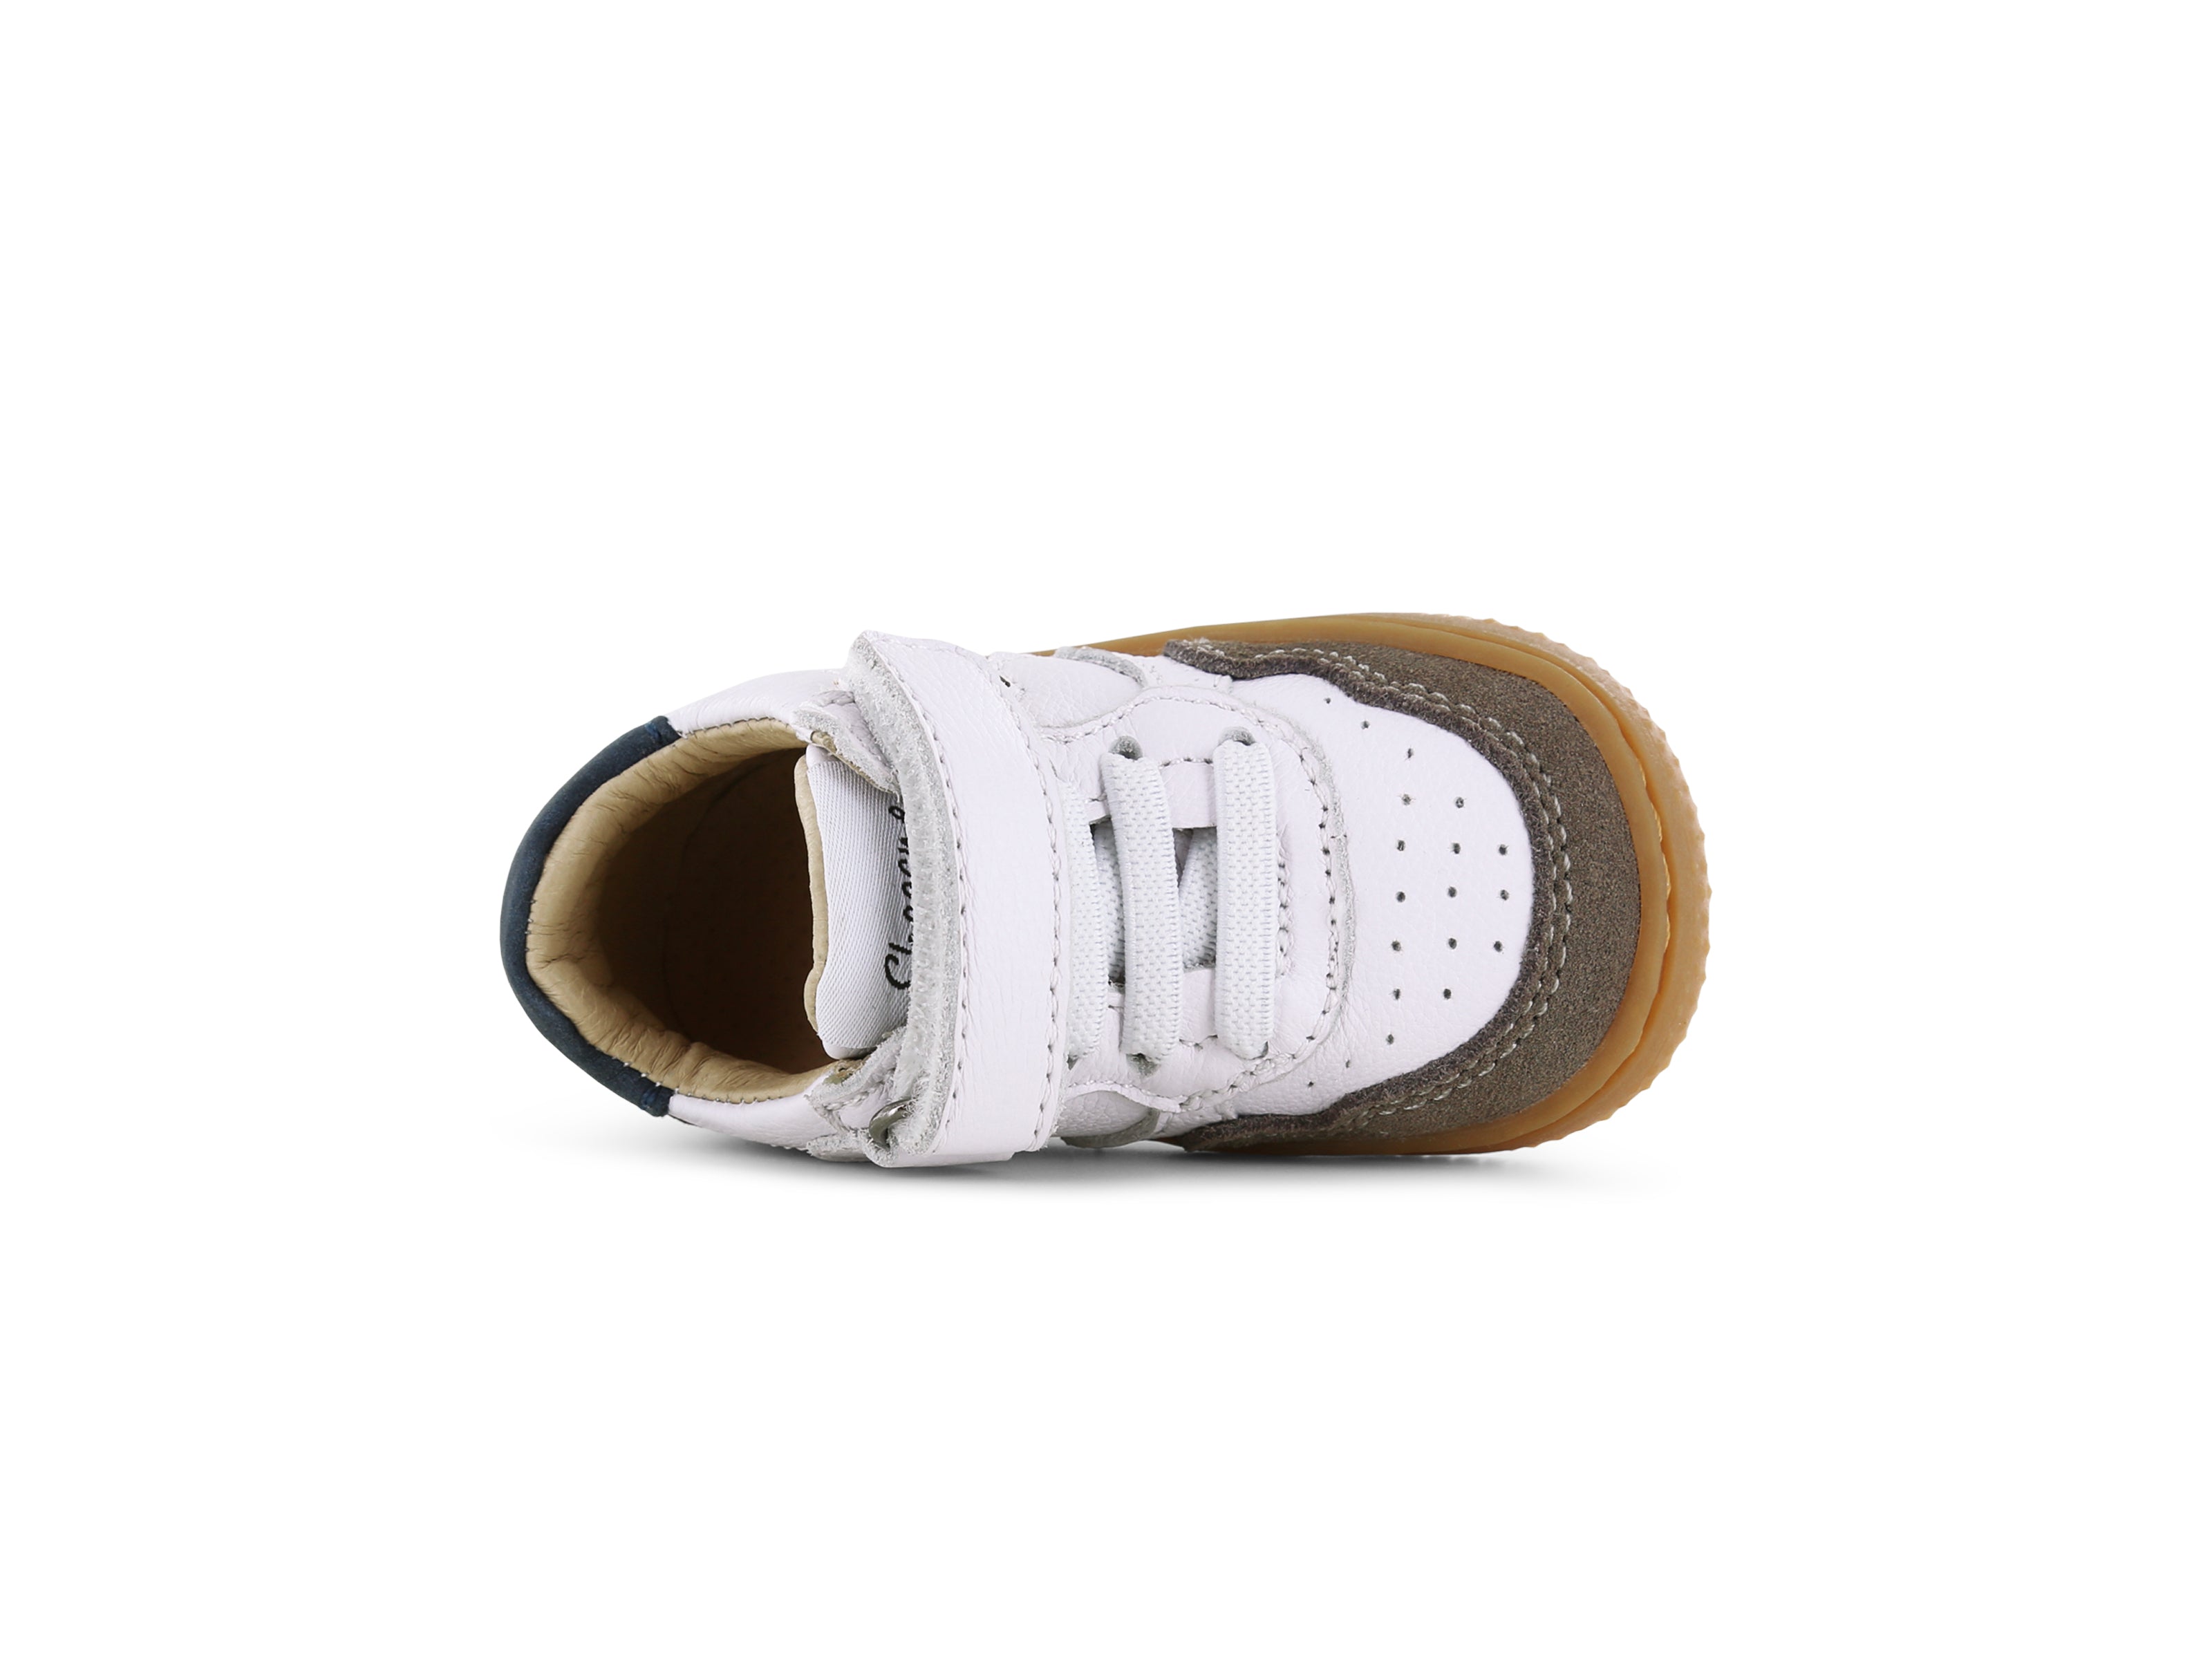 Shoesme wit-taupe basket sneaker